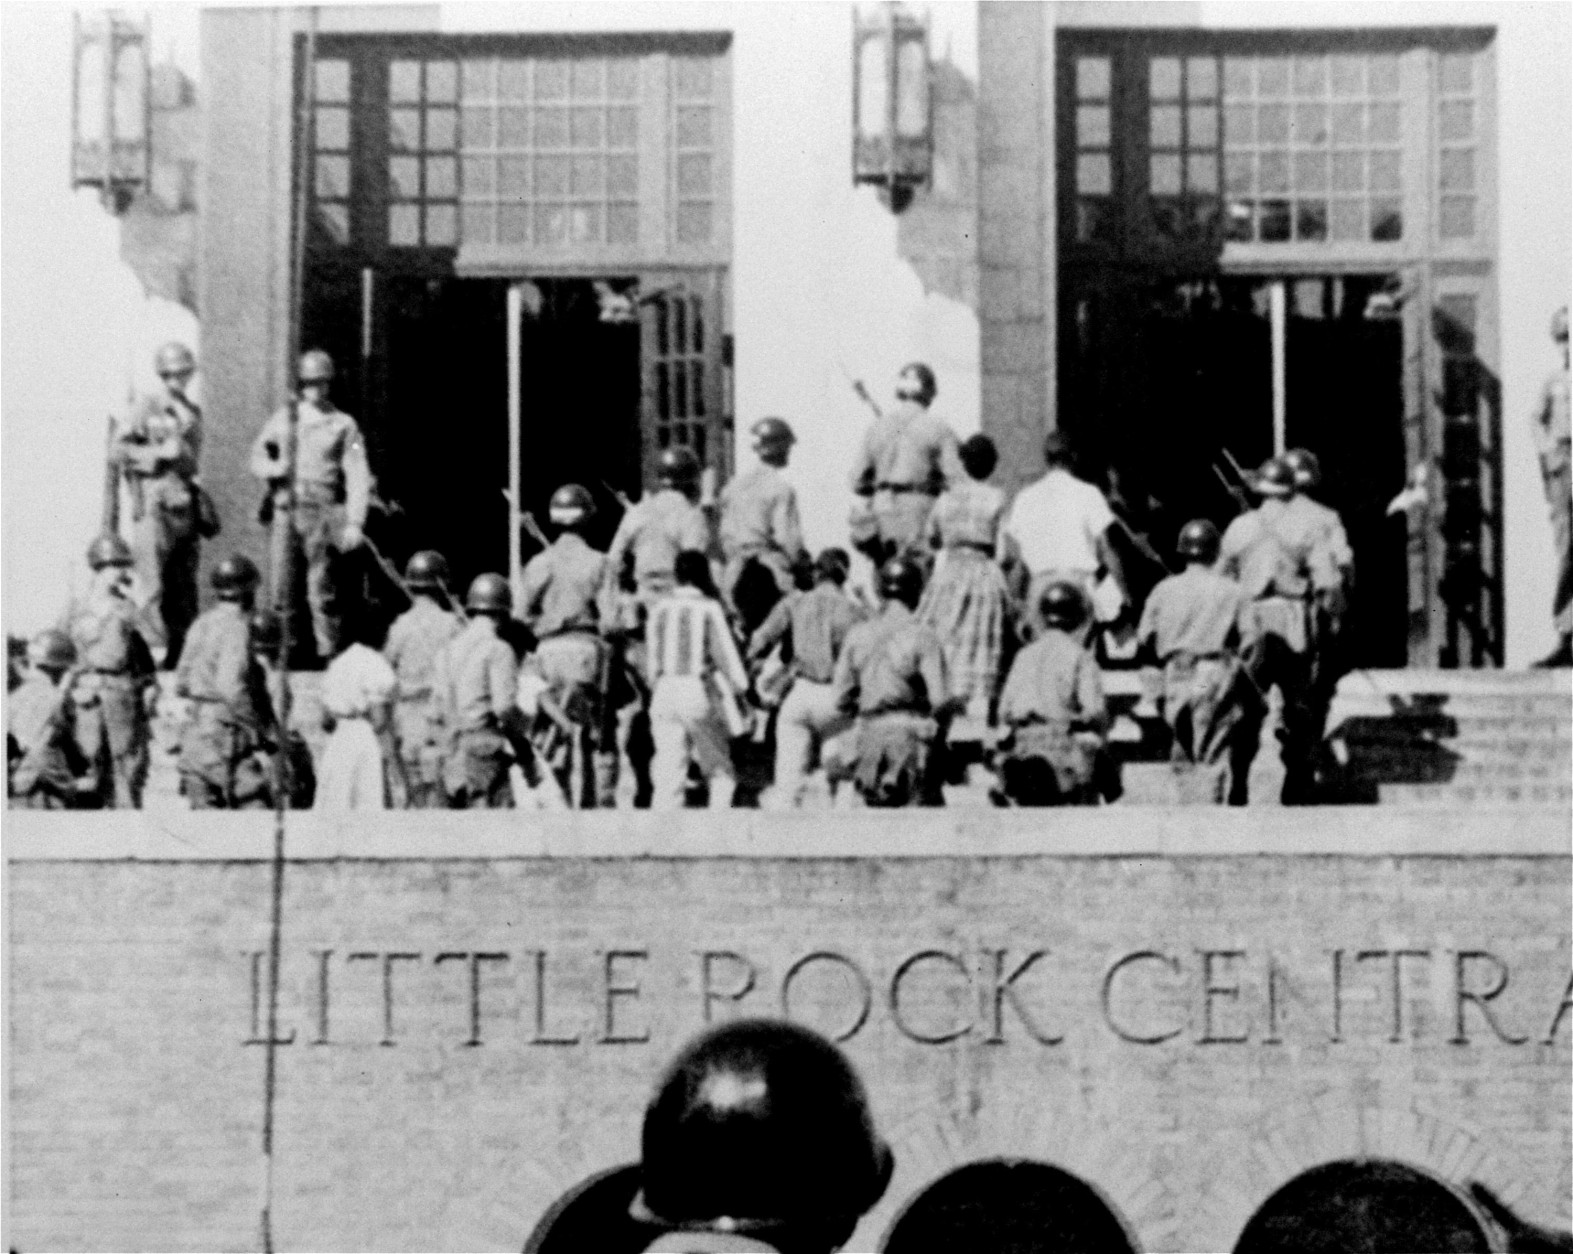 ** FILE ** In this Sept. 25, 1957, file photo, troops of the 101st Airborne Division escort  nine black students into Little Rock Central High School. The city is marking the 50th anniversary of Central High School's integration in September 2007 with a series of events culminating in a ceremony featuring former president Bill Clinton and the Little Rock Nine. (AP Photo, File)